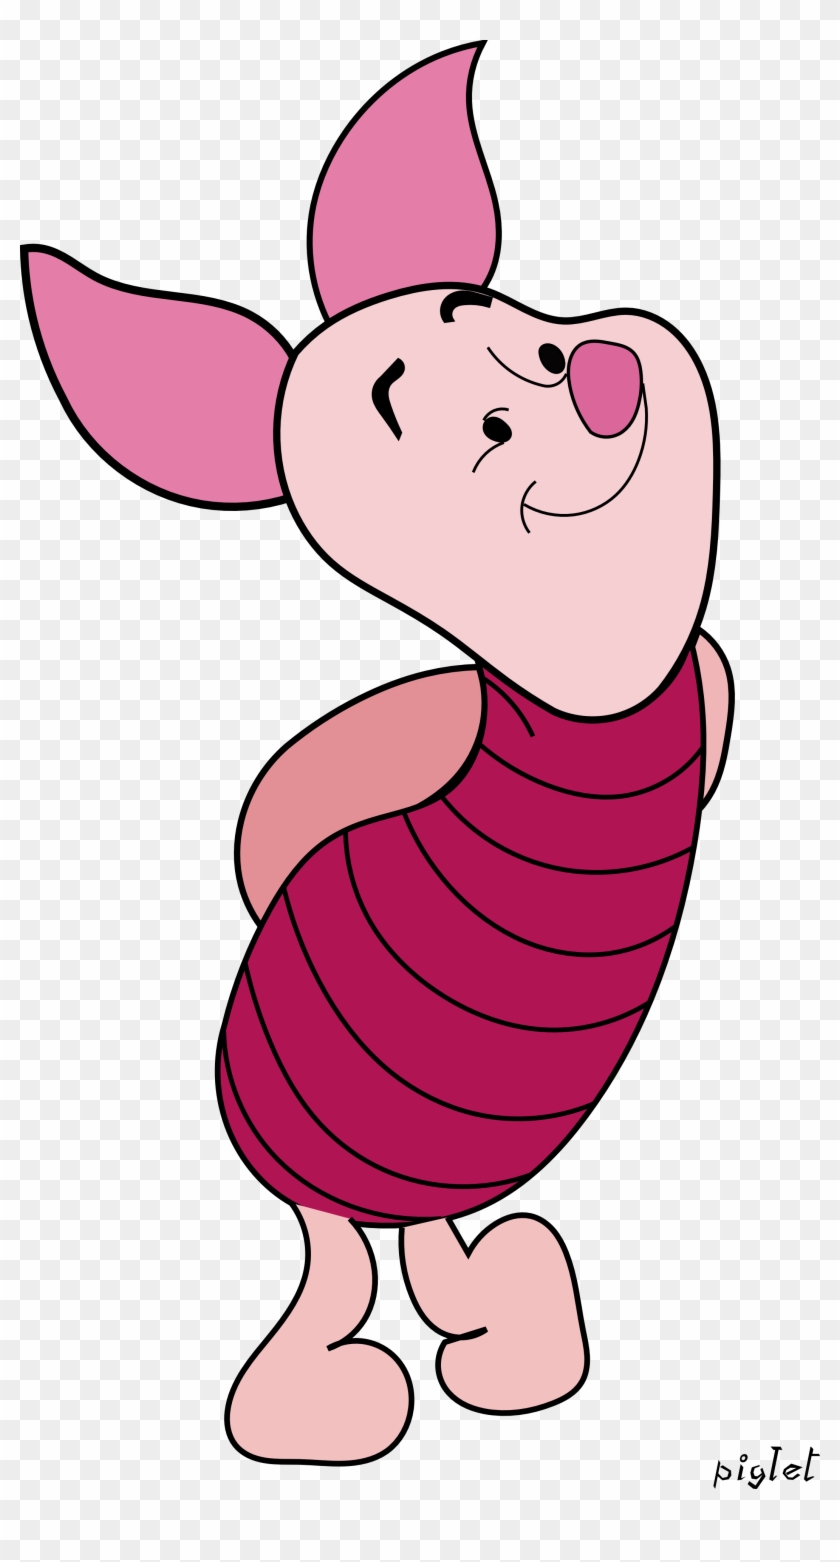 Winnie The Pooh Clipart Whinny Piglet Winnie Pooh Png Transparent Png 2117x37 Pngfind